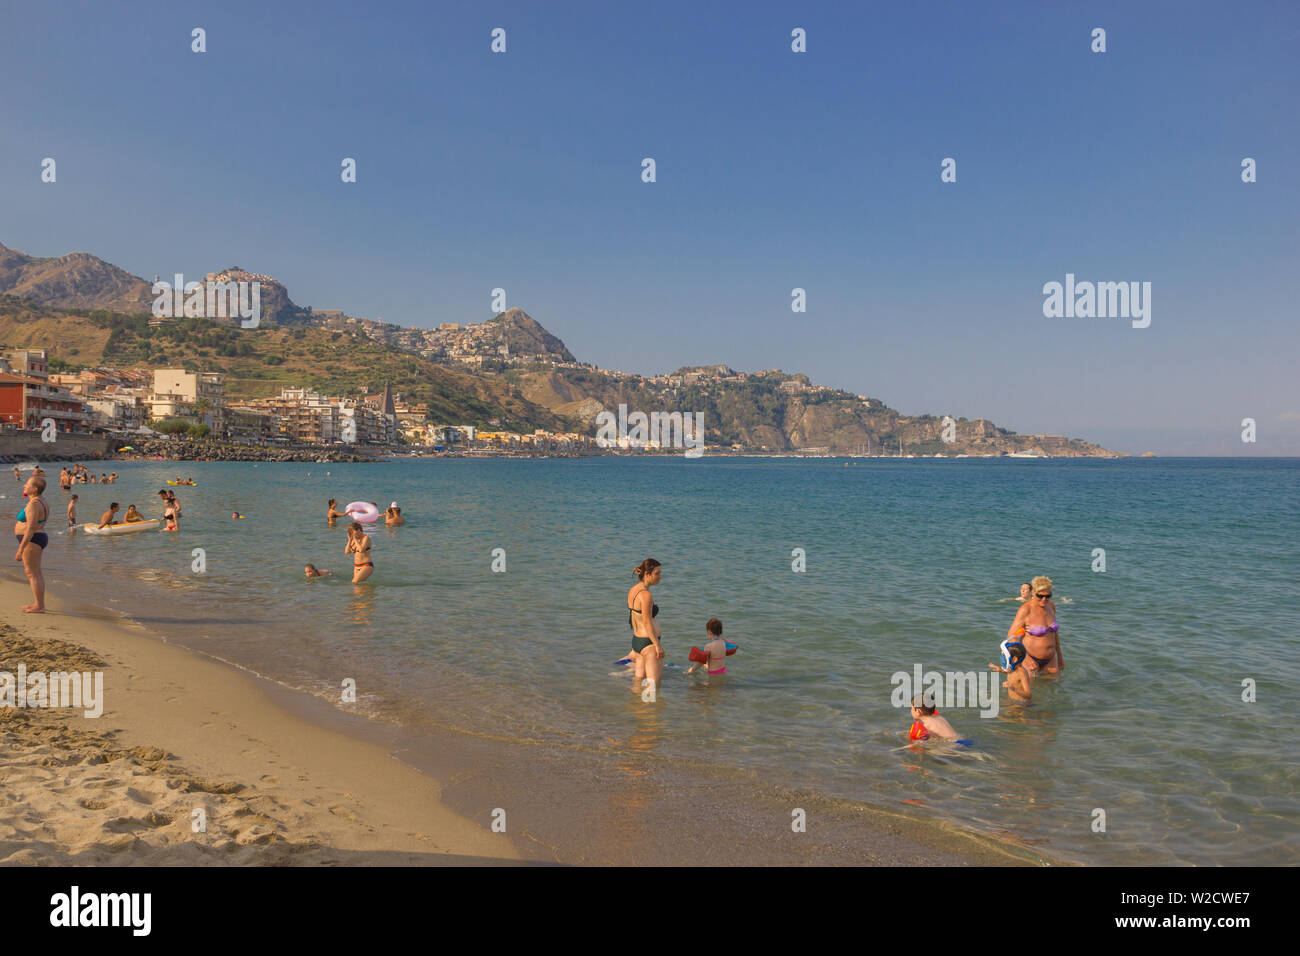 Giardini Naxos Sicily Italy 2019 Summer vacation picture with people enjoying the beach and beautiful sea, with coastline and far Taormina Stock Photo